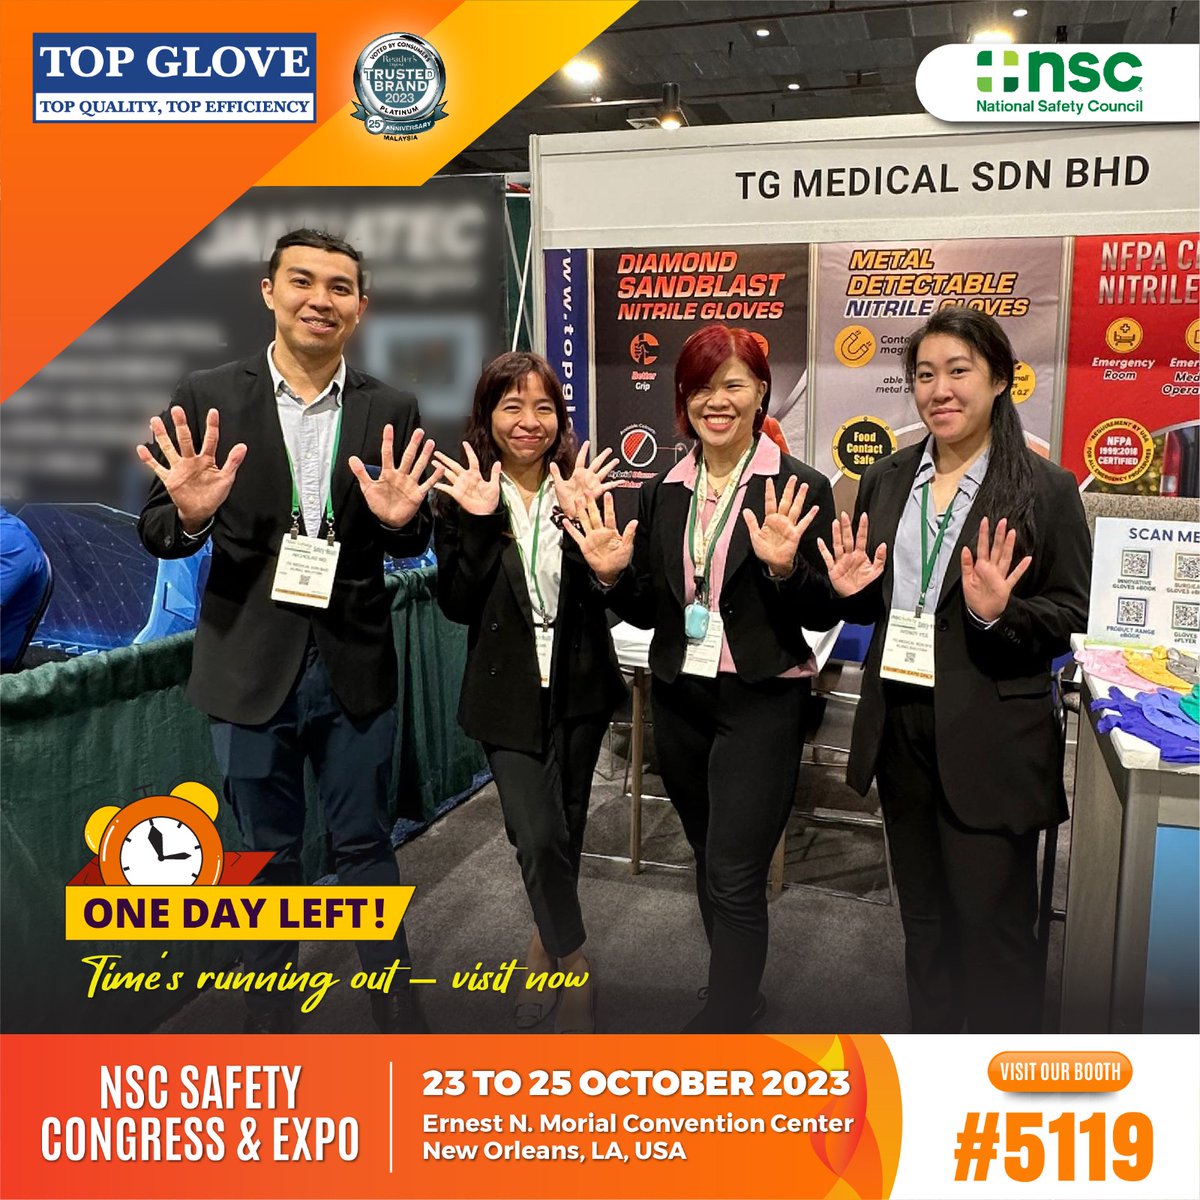 The NSC Safety Congress & Expo is heading into its final day.

Don't miss out on our latest product lineup & discover how Top Glove can enhance your organization. Join us at booth 5119.

Looking forward to your visit!😉

#TopGlove #NSCExpo #SafetyInnovations #Letsmakepeoplesafer